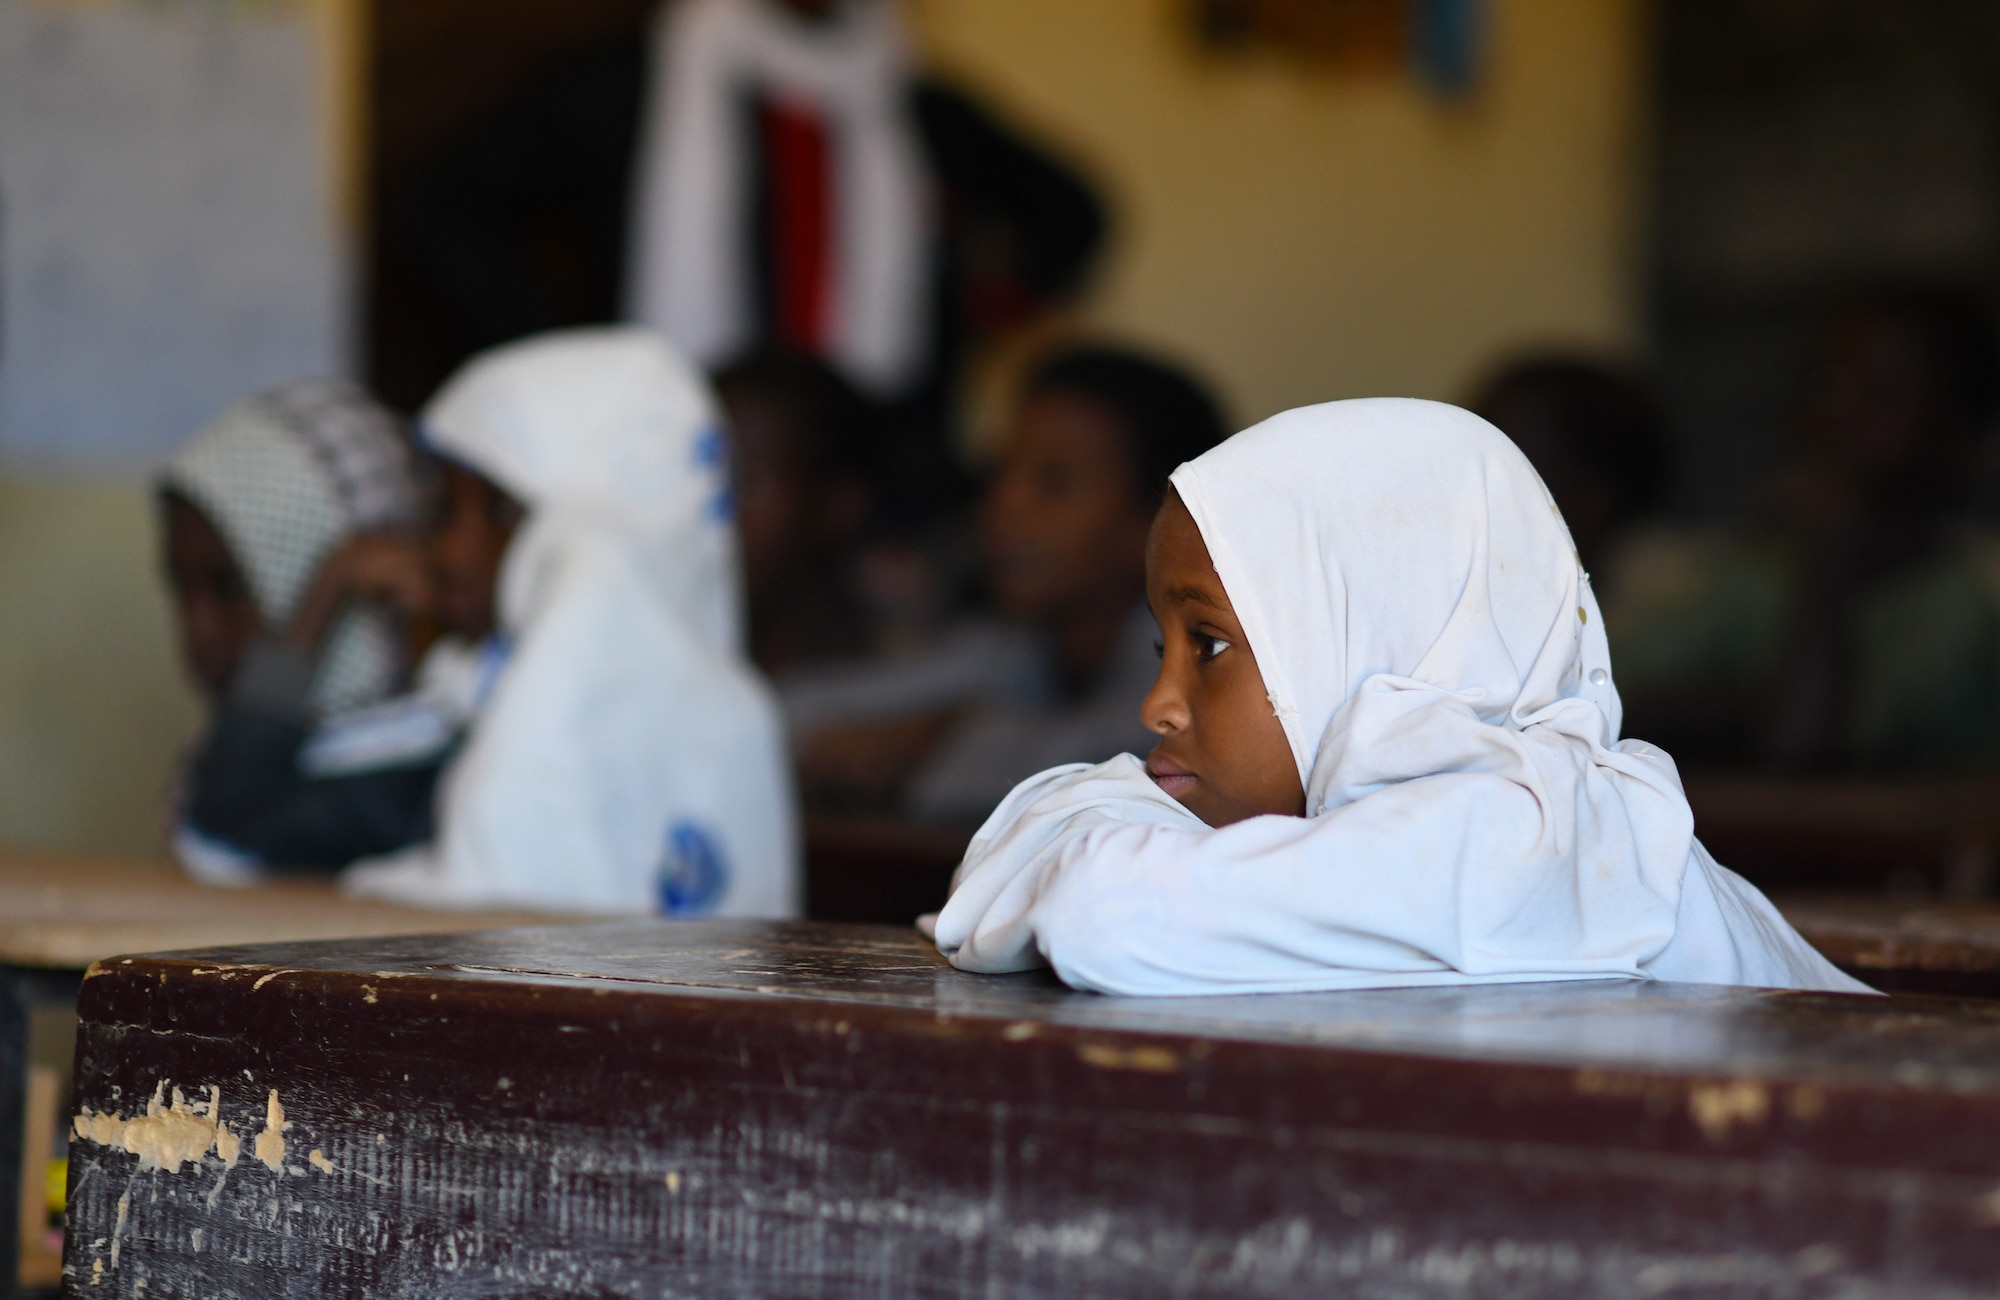 Local school children attend a dental hygiene course in the village of Tsakatalam, Niger, Dec. 14, 2019. The U.S. Army 443rd Civil Affairs Battalion Civil Affairs Team 219 deployed to Nigerien Air Base 201 partnered with local Agadez city dentist, Dr. Mahaman Aicha, to teach the Tsakatalam Primary School students for the first time how to properly brush and floss their teeth and the importance of good oral health. (U.S. Air Force photo by Staff Sgt. Alex Fox Echols III)